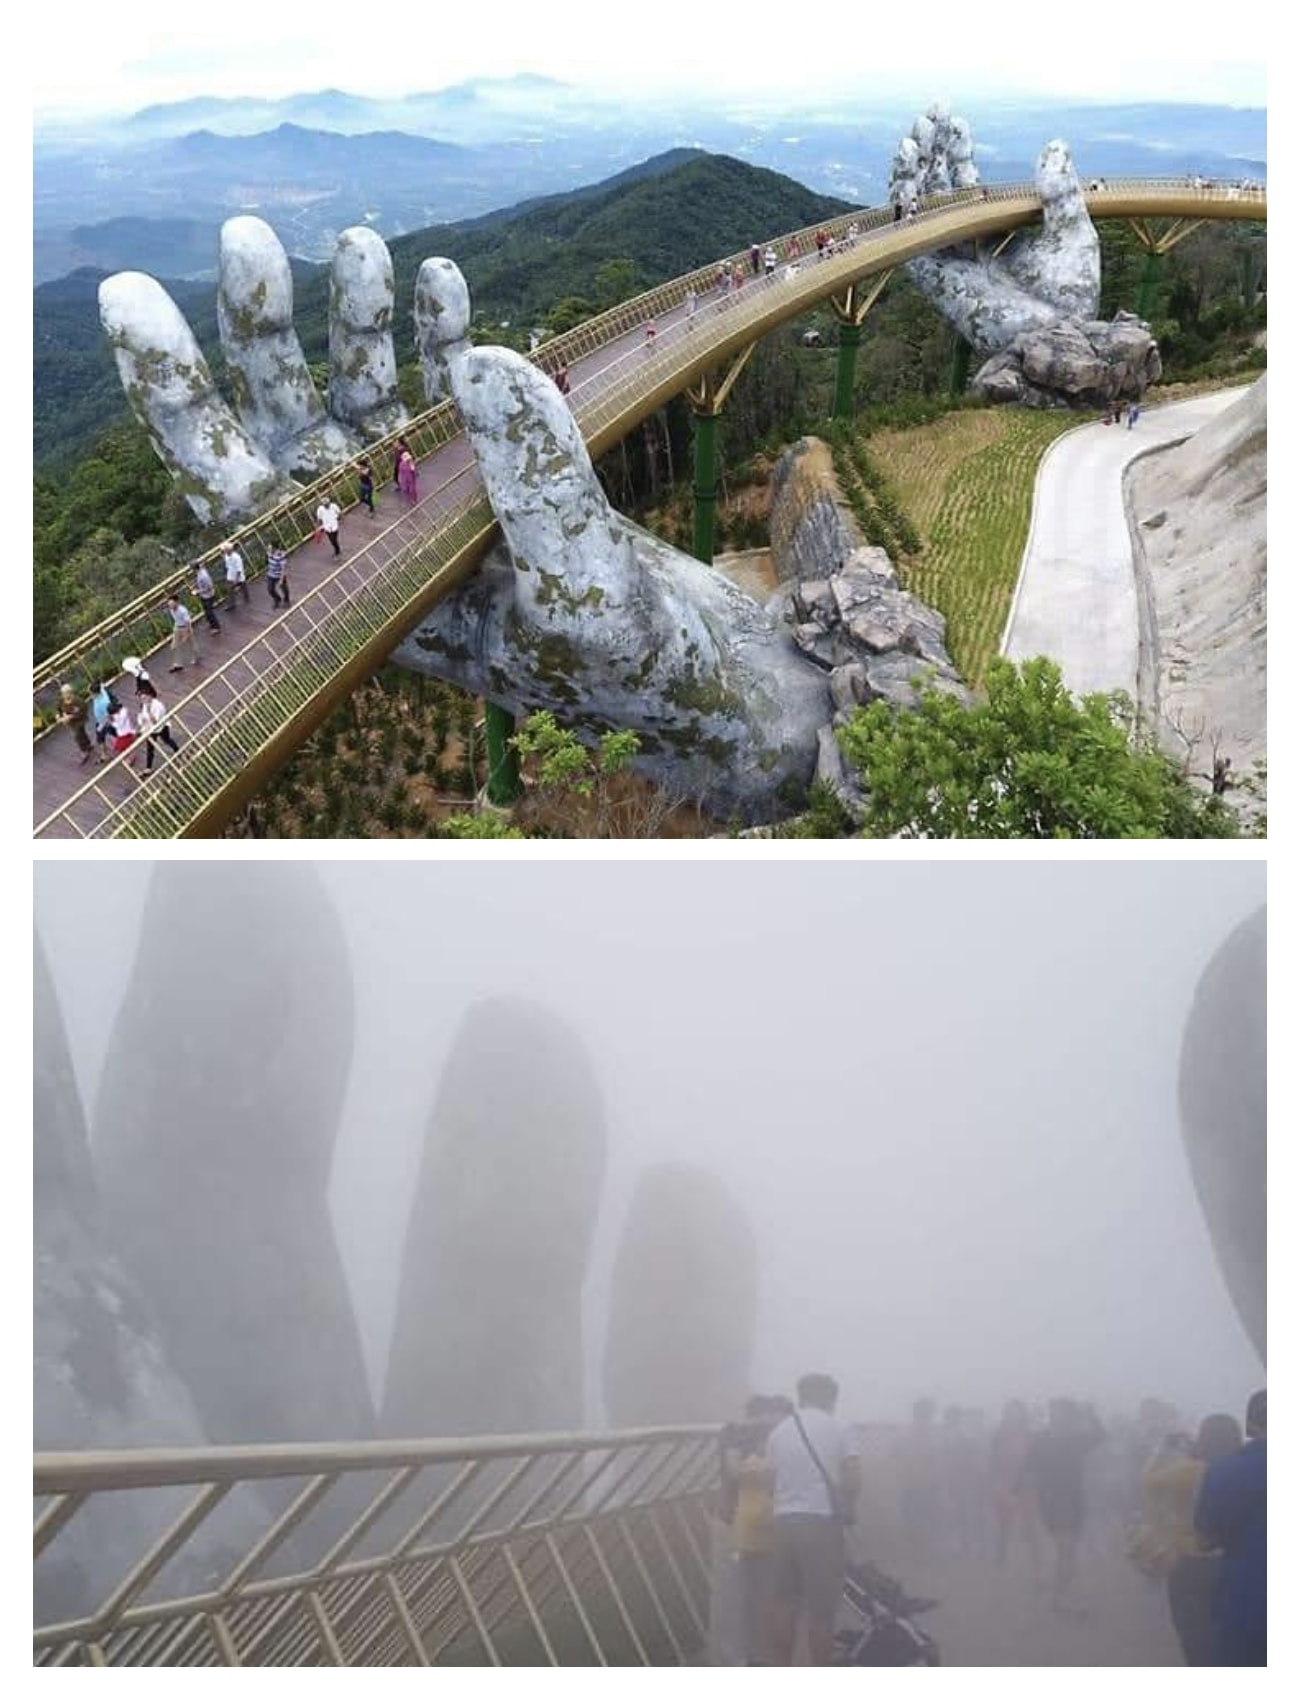 Two images showing the Golden Bridge in Vietnam. The top image is a clear photo of the bridge, which rests in two giant stone hand statues and overlooks a stunning mountain range. The second image is a view from on the bridge, where everything is obscured by a thick fog.